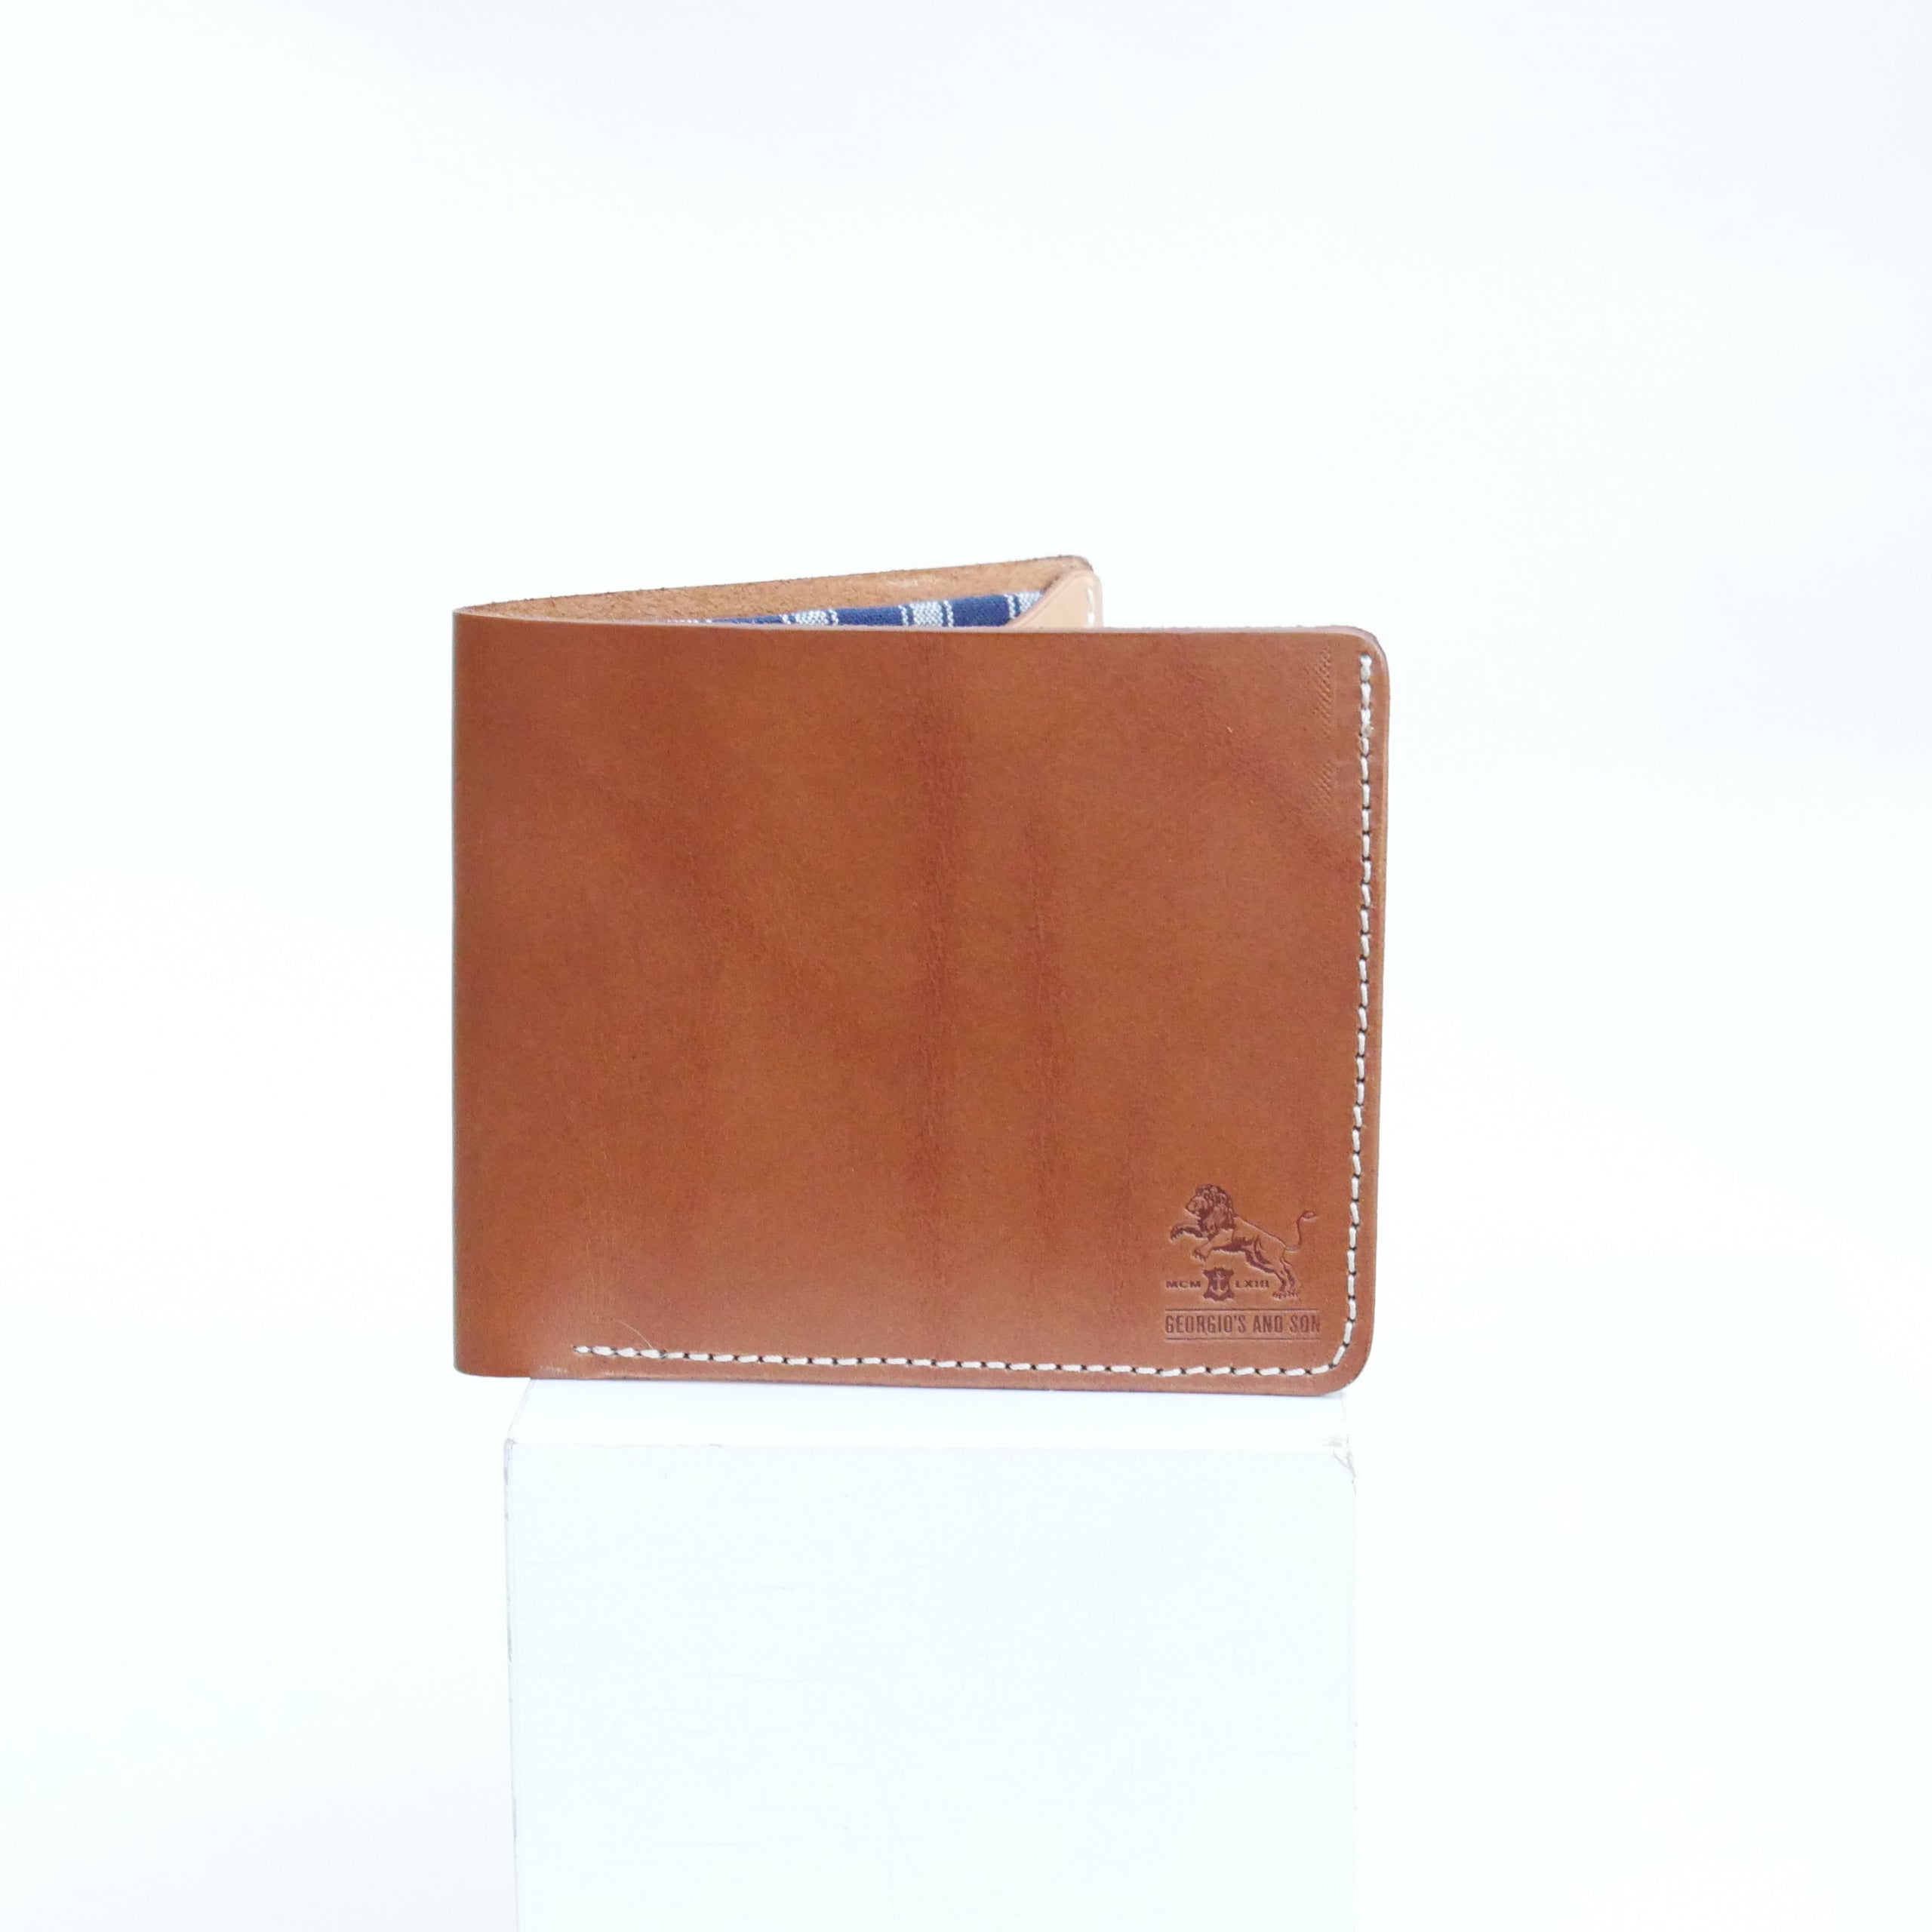 Woodland Bi-fold PU Leather Wallet - Card Holder Money Clip in Black and  Brown - Compact and Versatile